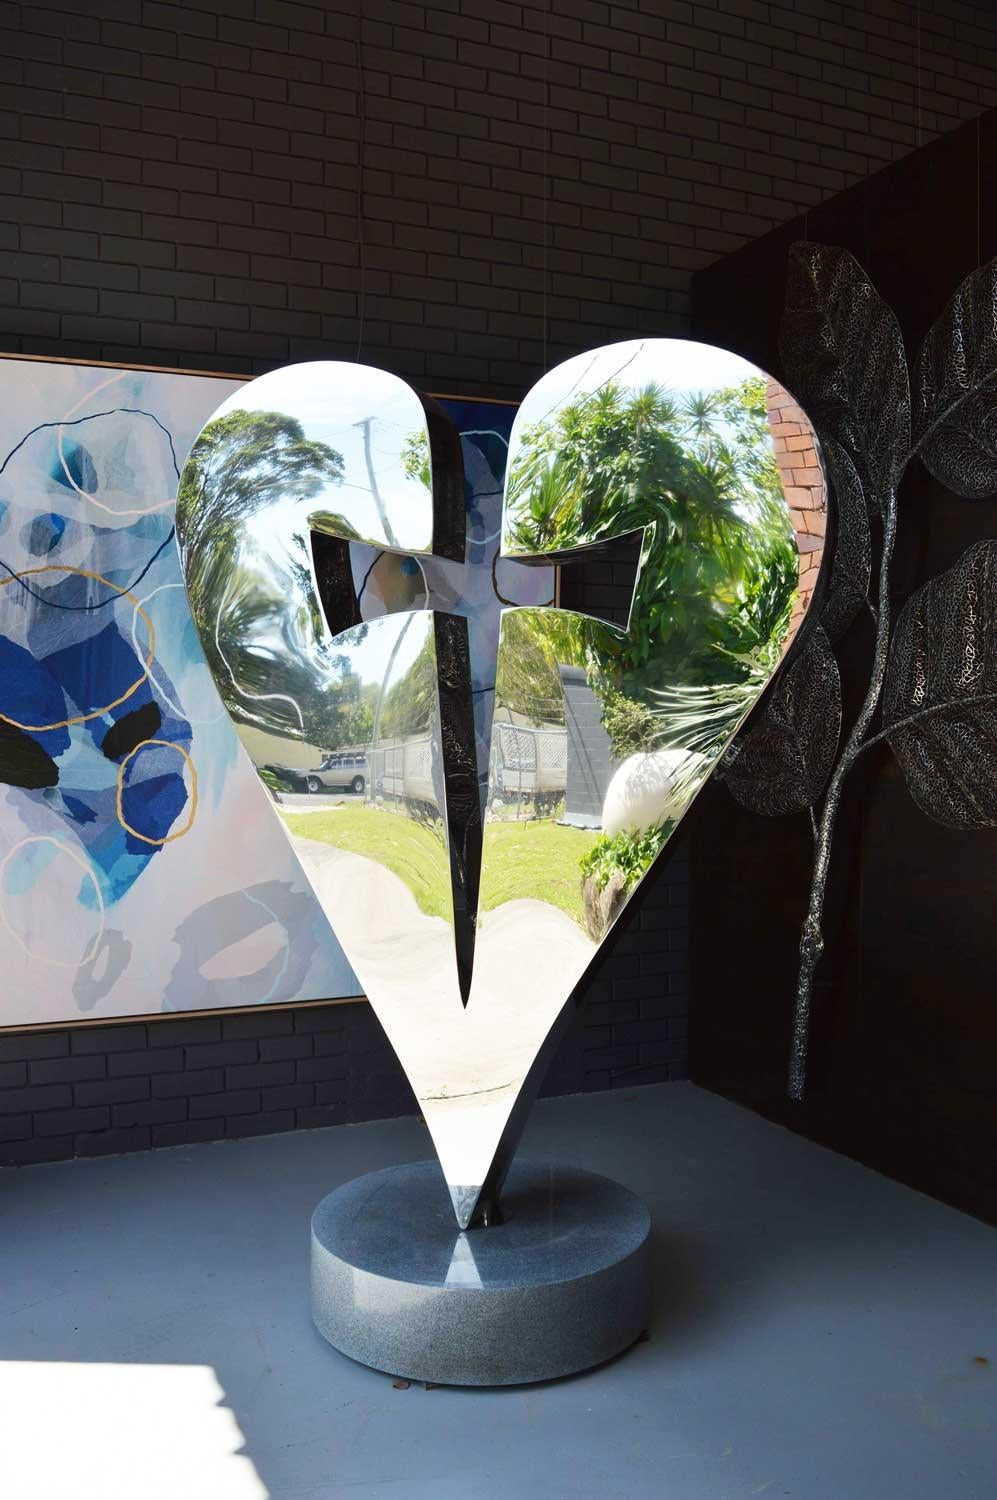 Constructed from stainless steel polished to a mirror-finish, and sitting upon a solid granite plinth, this heart and dagger symbolises the dichotomy of love and hate.
It is able to be turned within it's fitting to find it's perfect angle.
The